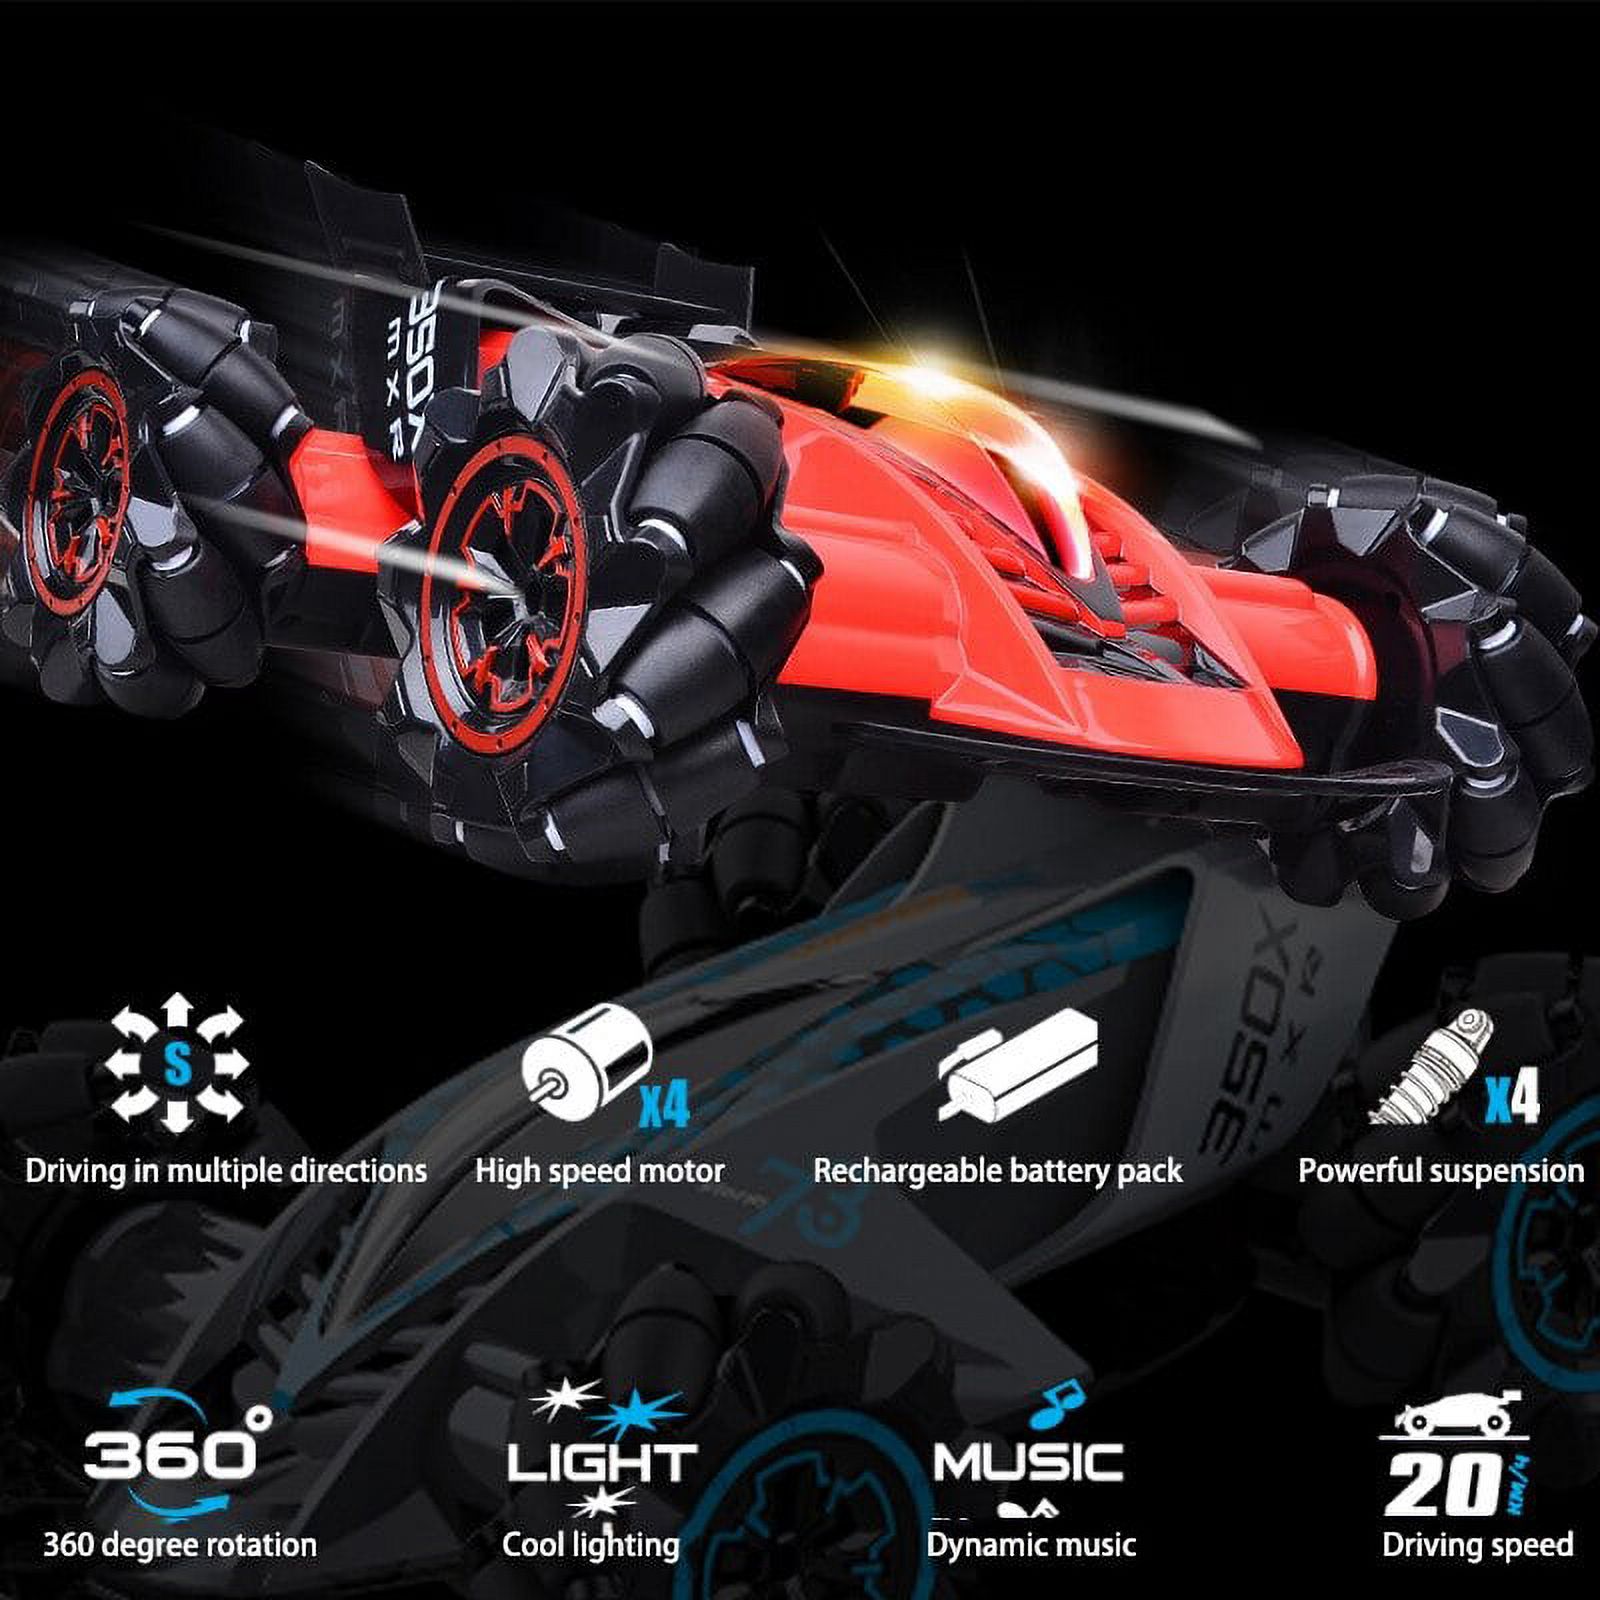 HILLO 2.4G RC Drift Stunt Car 4WD Multi-Direction LED High Speed Off-Road Vehicle With Tail Glowing Water Vapor Jet - Handle Remote Control And Watch Style Gravity Remote Control Included (Red) - image 2 of 10